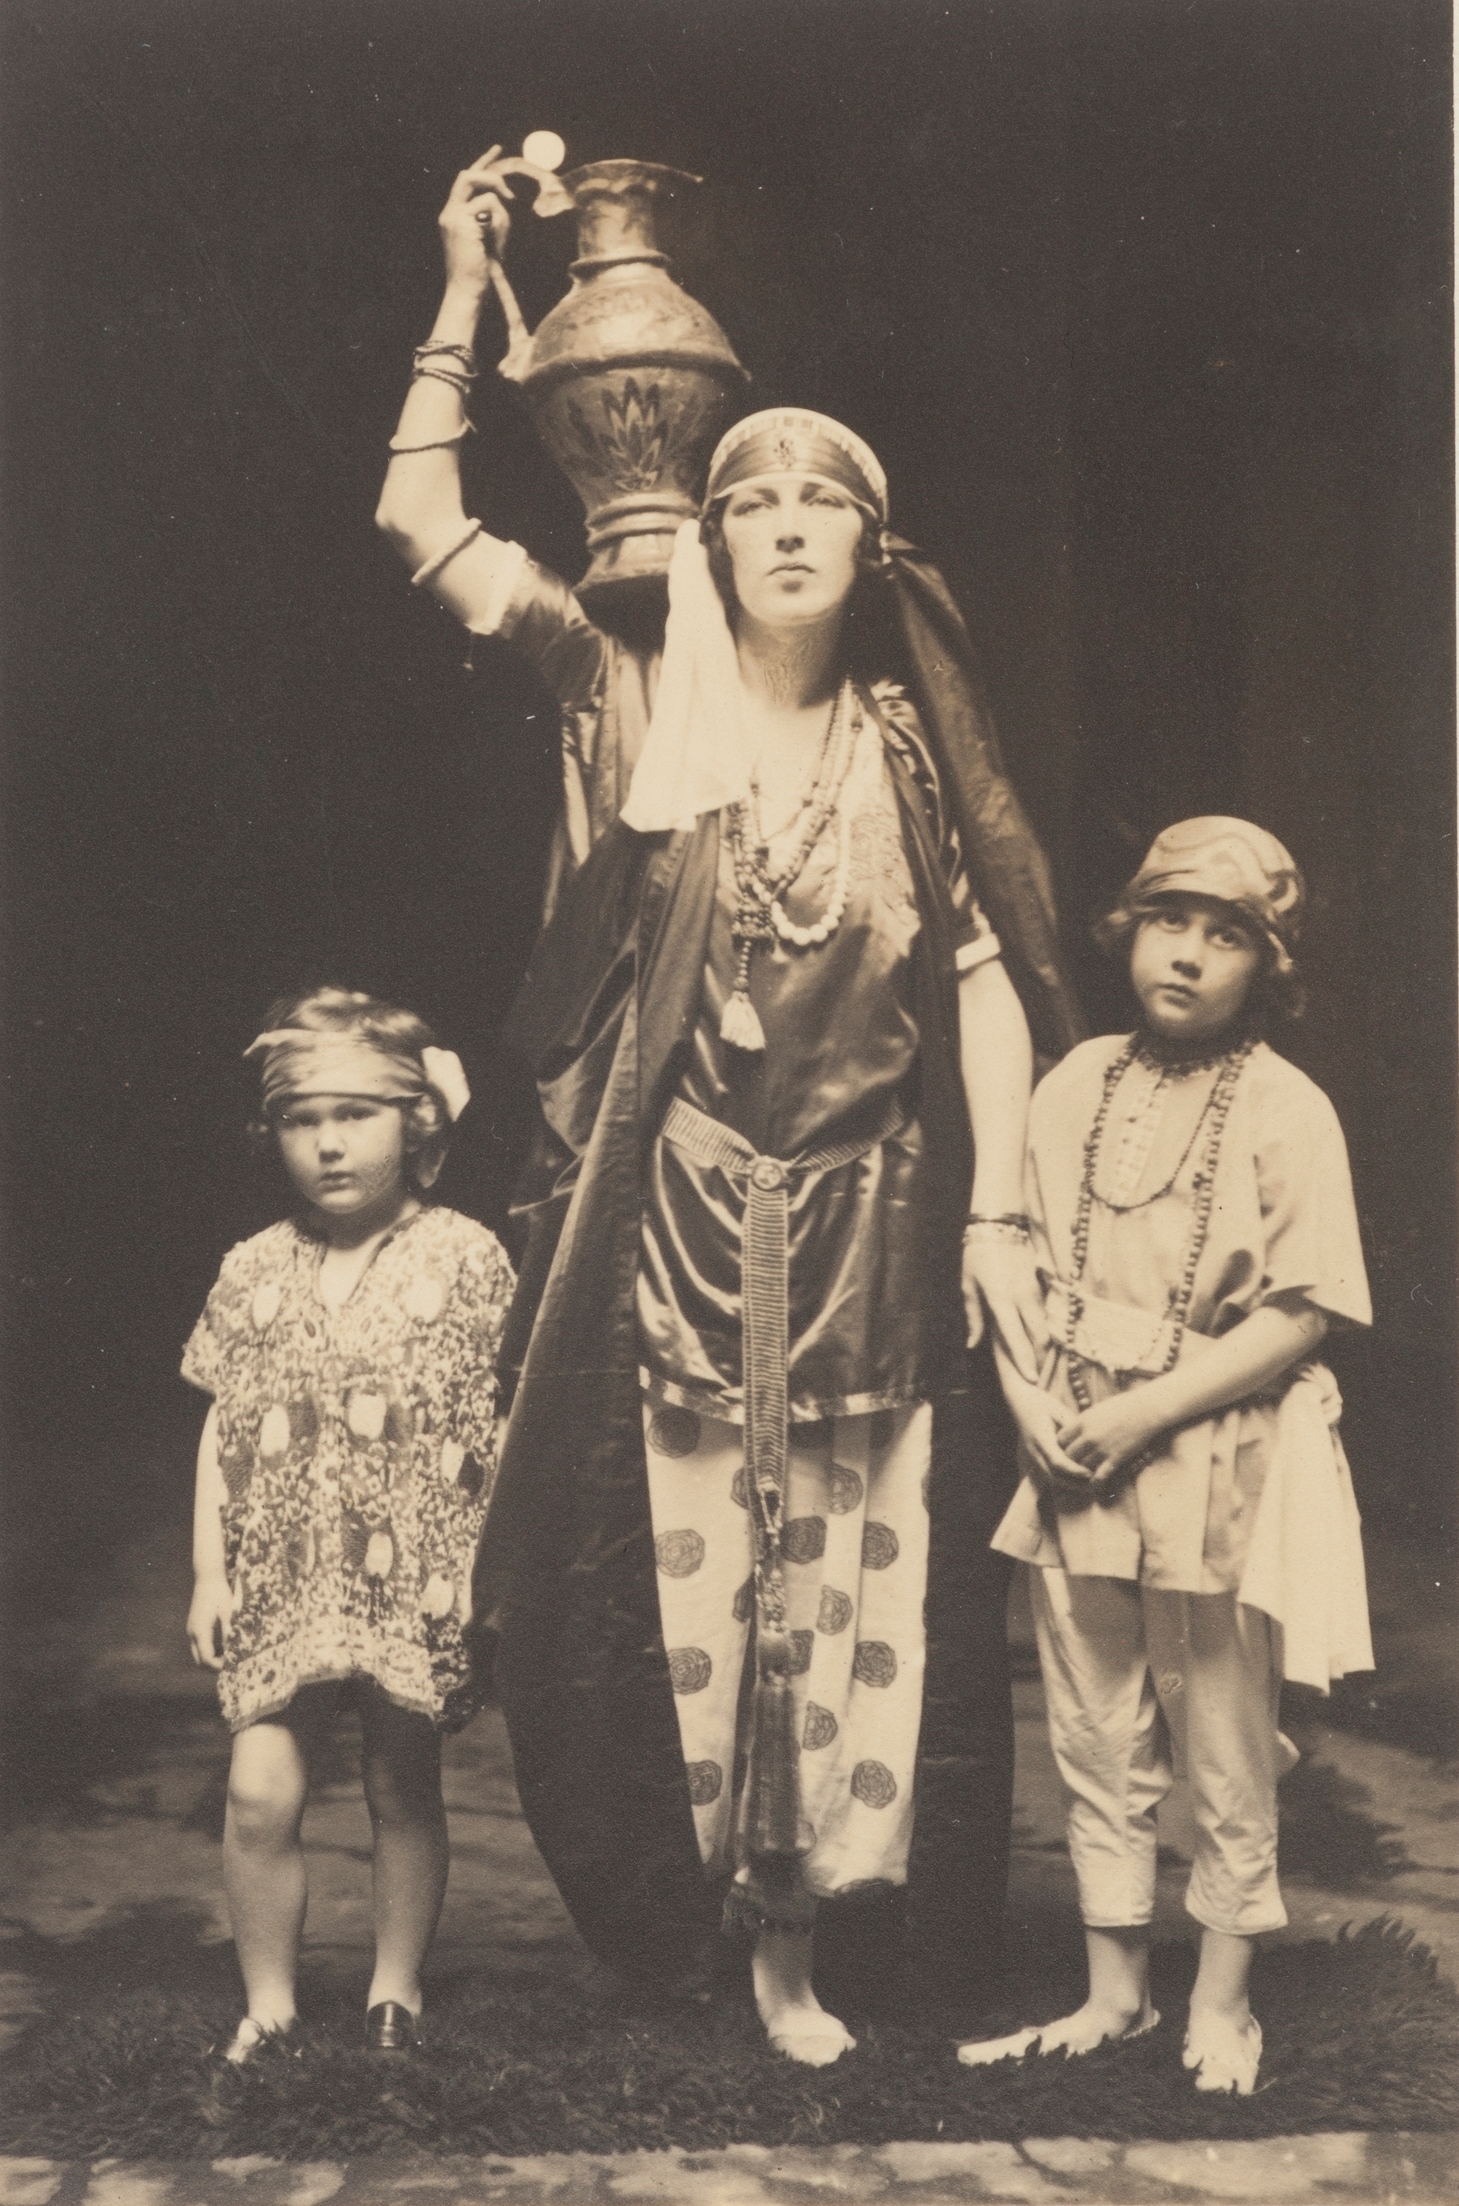 Mrs Leslie Walford as the wife of the Merchant Prince, with Anthony Hordern and Pauline McDonald in the matinee 'In a Persian Garden', held at the Theatre Royal, Sydney, 7 July 1922, in aid of the Royal Alexandra Hospital for Children / Harold Cazneaux